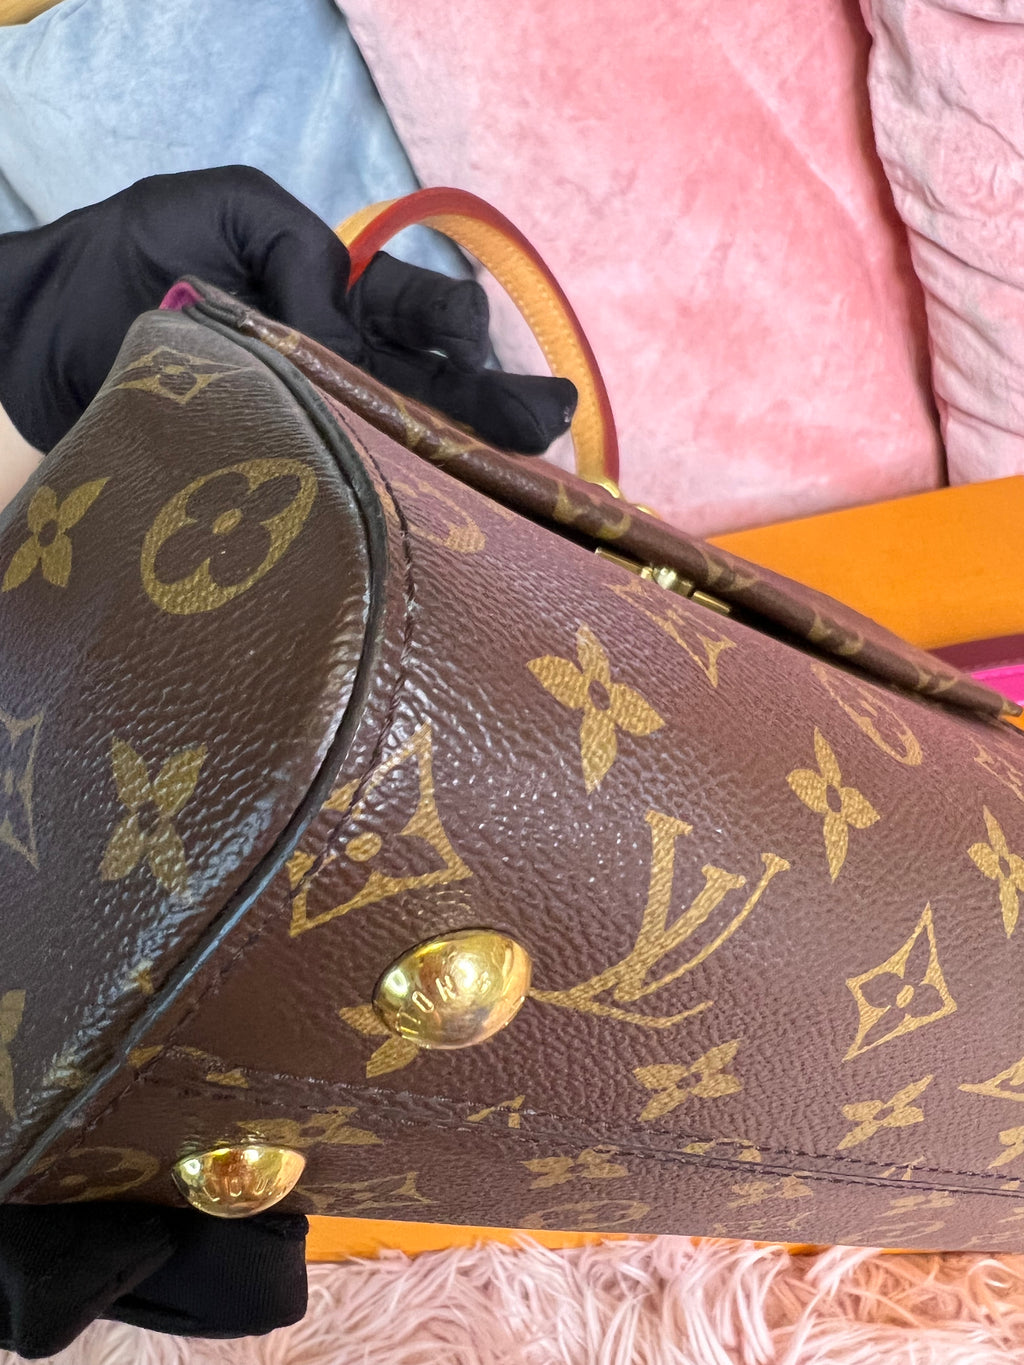 Preloved Louis Vuitton Cluny BB